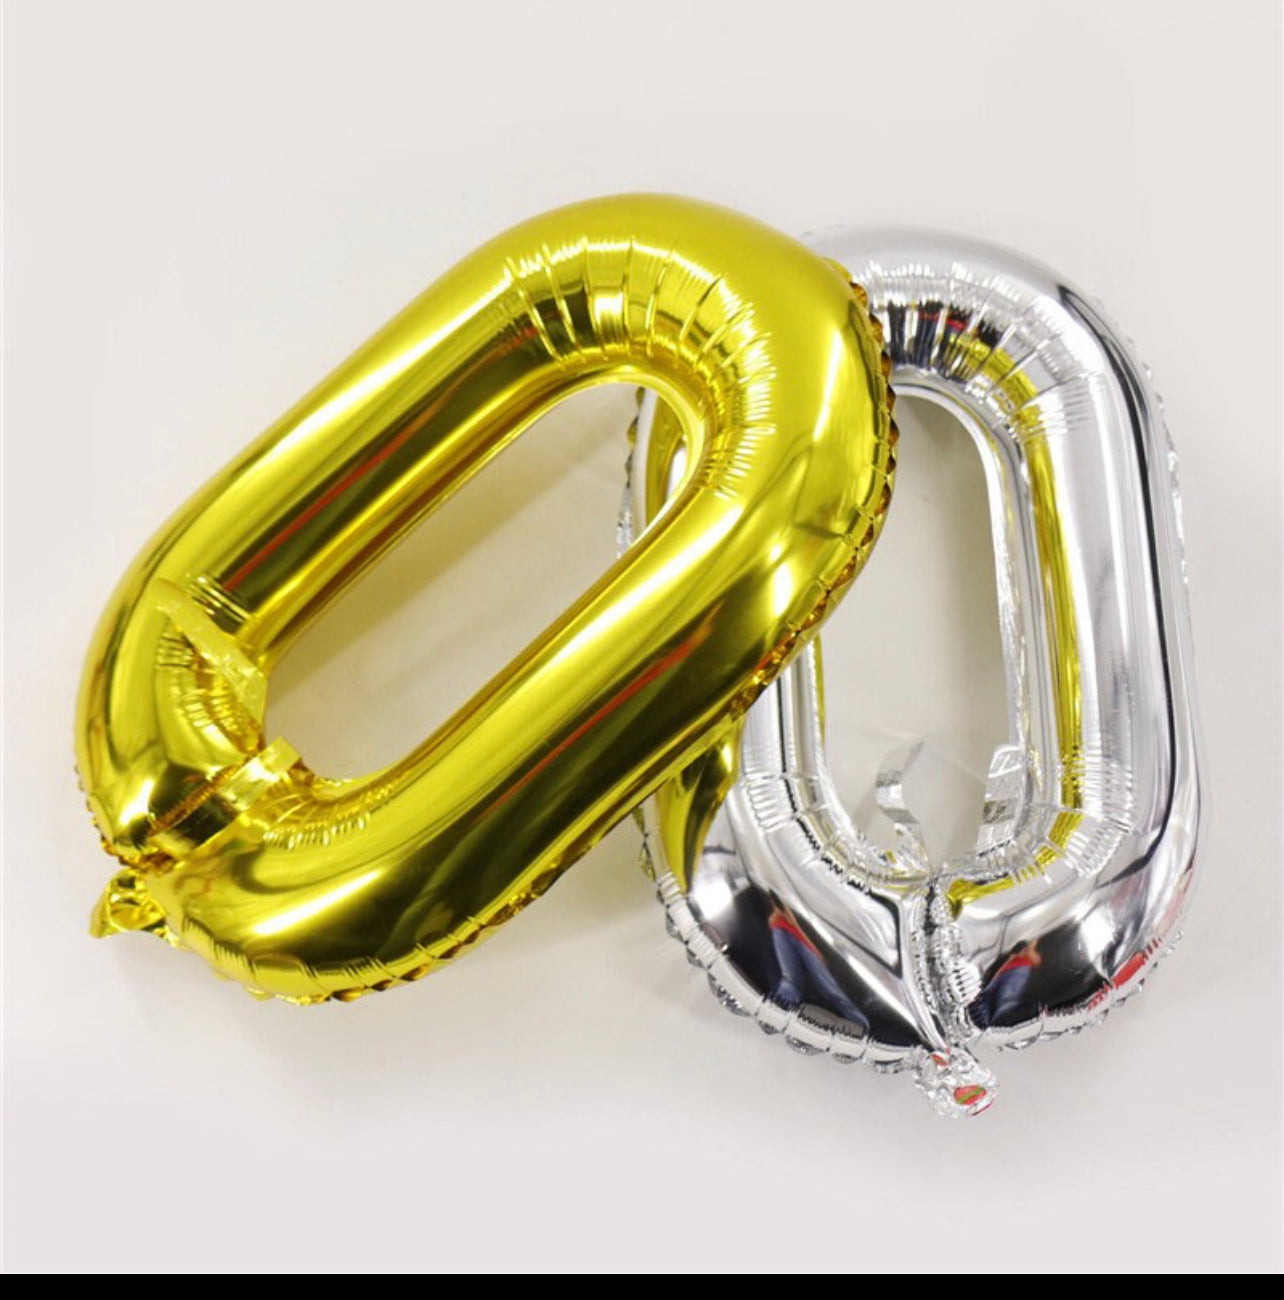 PARTY CHAIN BALLOONS - Live Shopping Tours